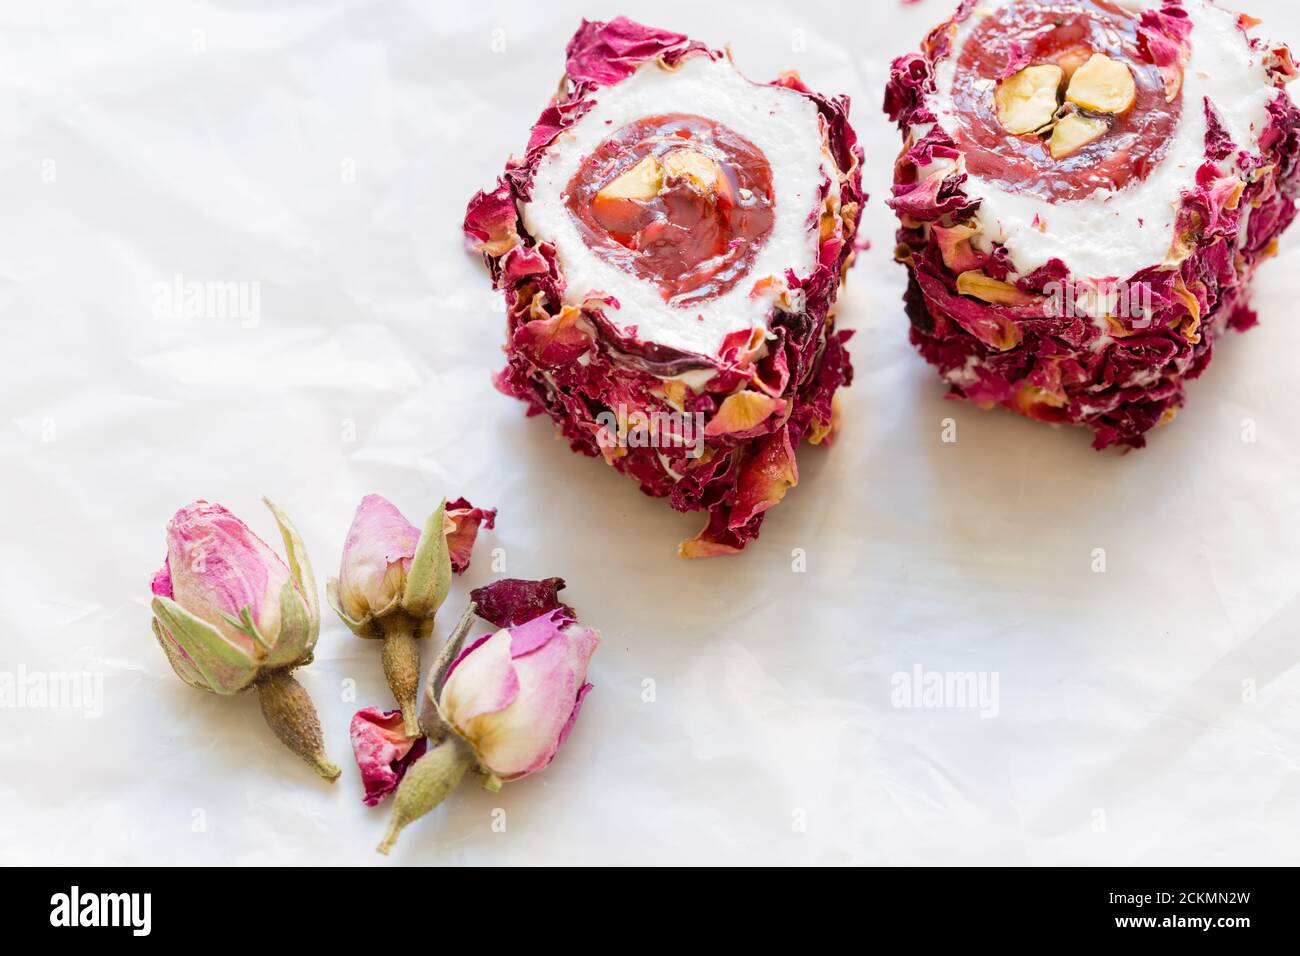 Turkish Delight with Real Rose Petals – Rn Flowers